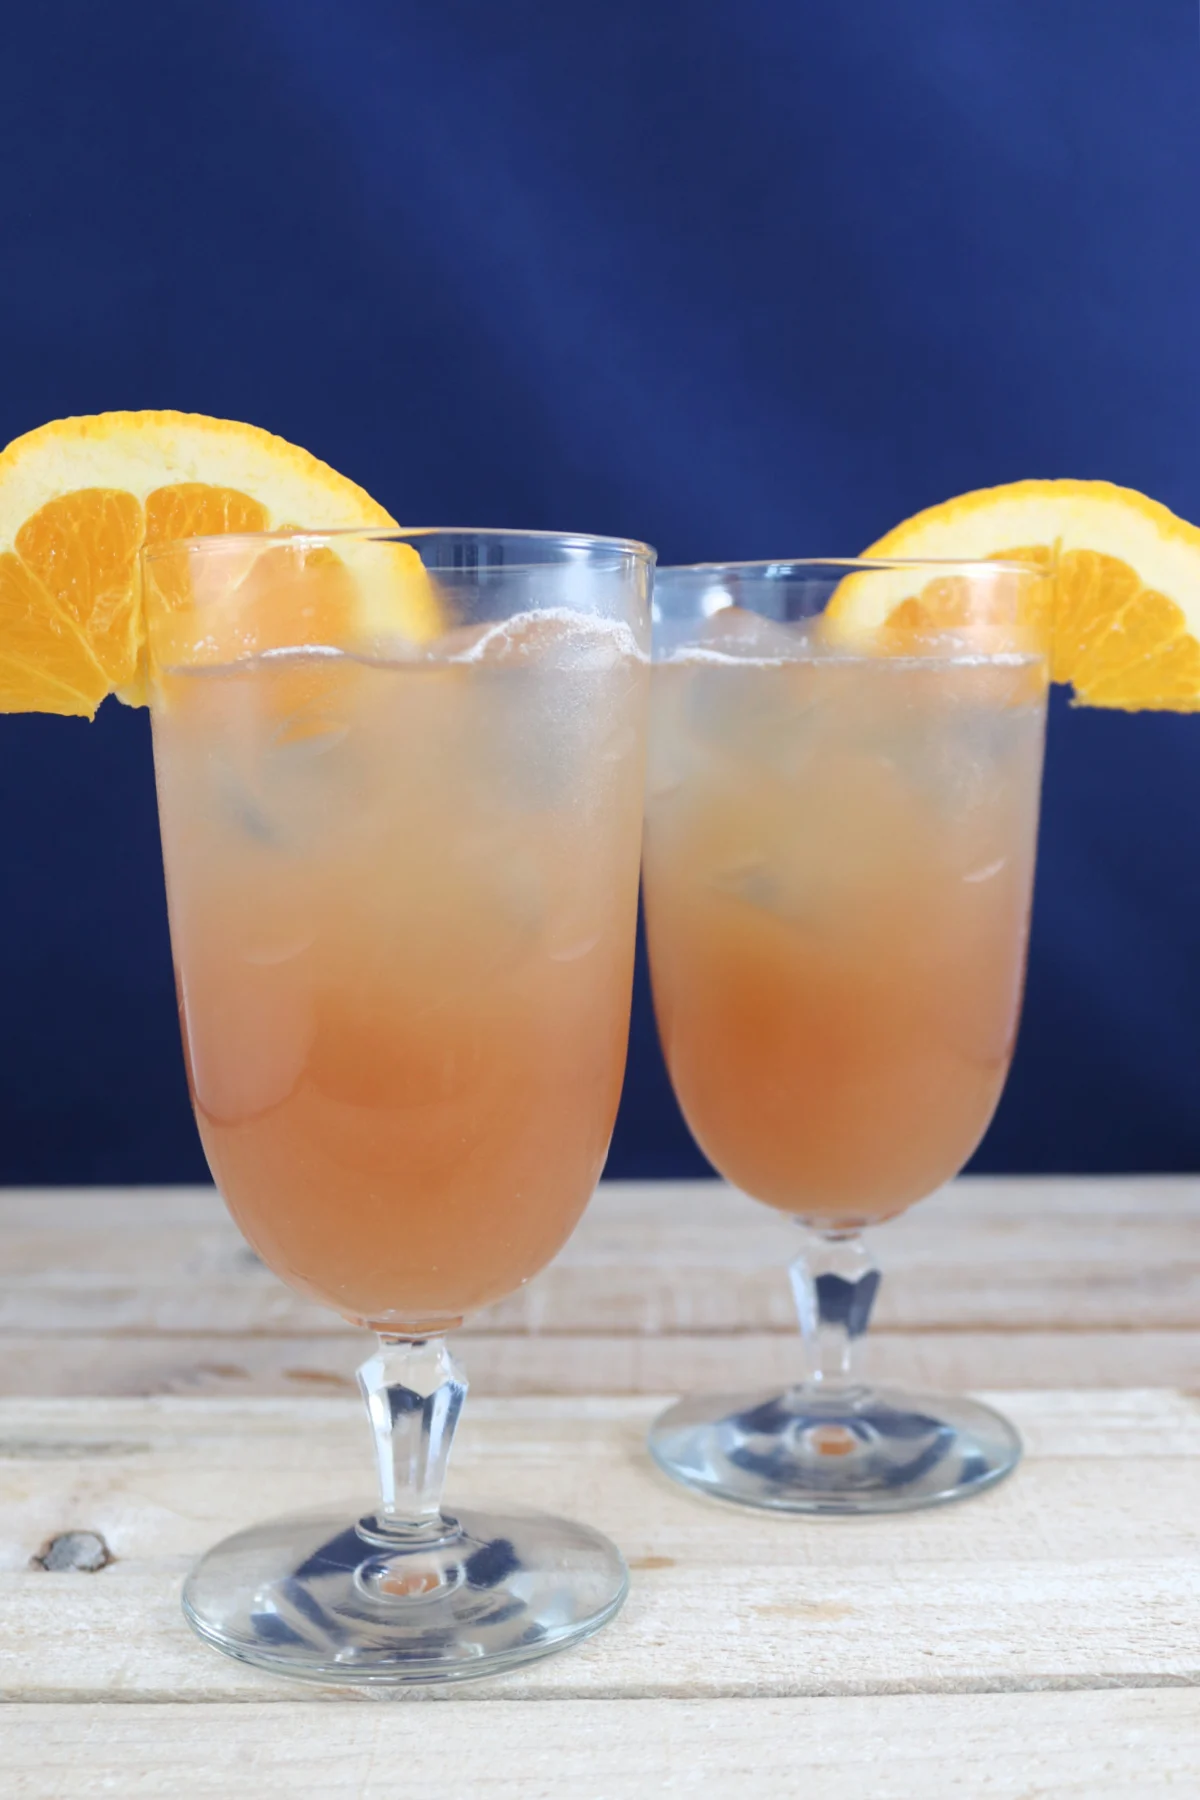 Two glasses of non-alcoholic cranberry orange spritzer garnished with an orange slice.